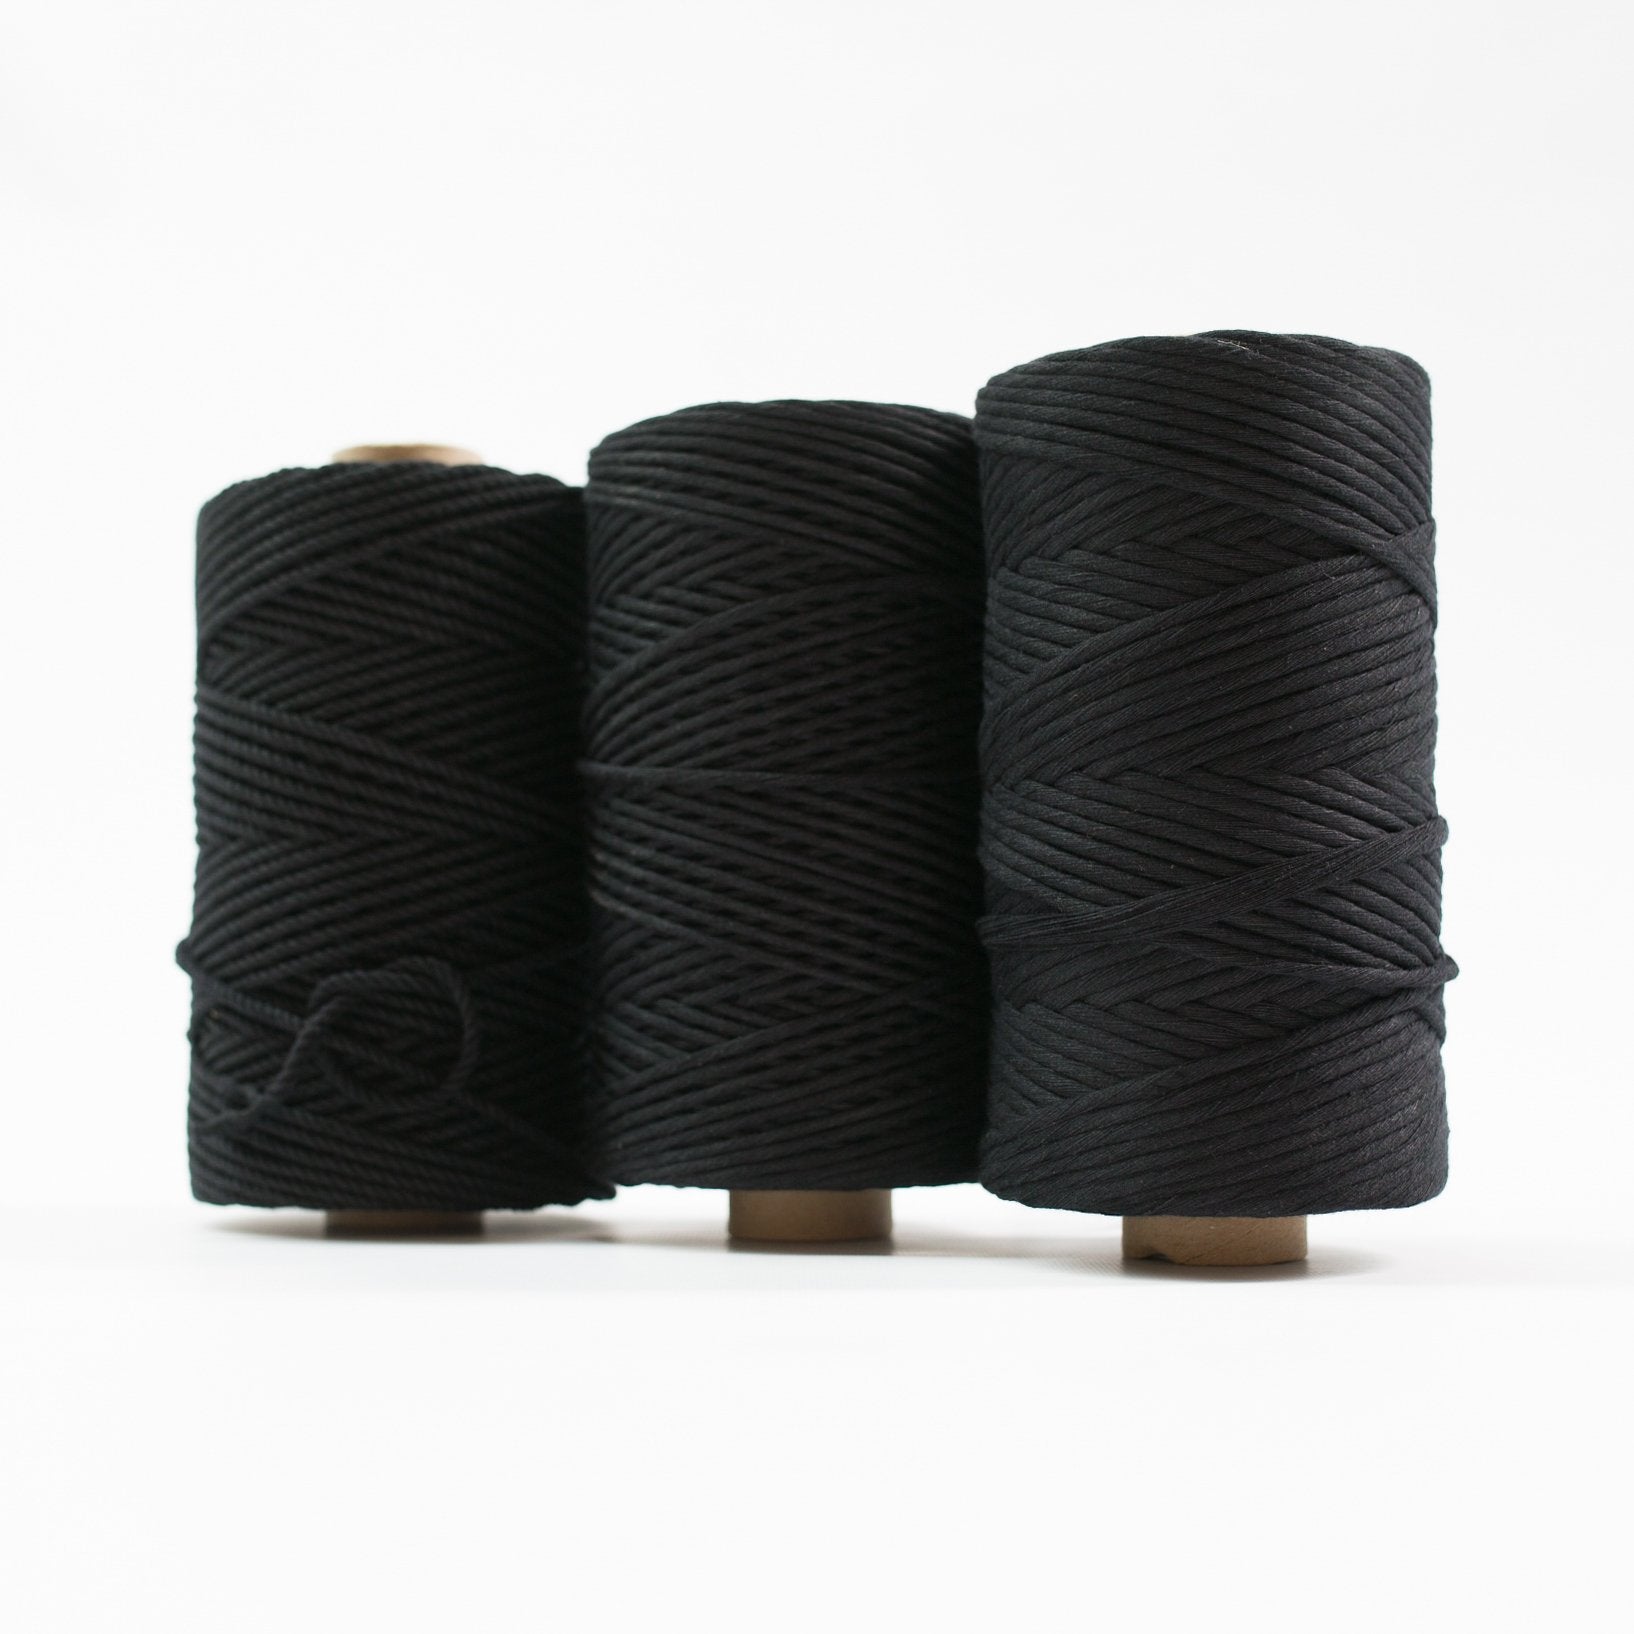 Mary Maker Studio Luxe Colour Cotton 4mm 1KG Recycled Luxe Macrame Rope // Black macrame cotton macrame rope macrame workshop macrame patterns macrame